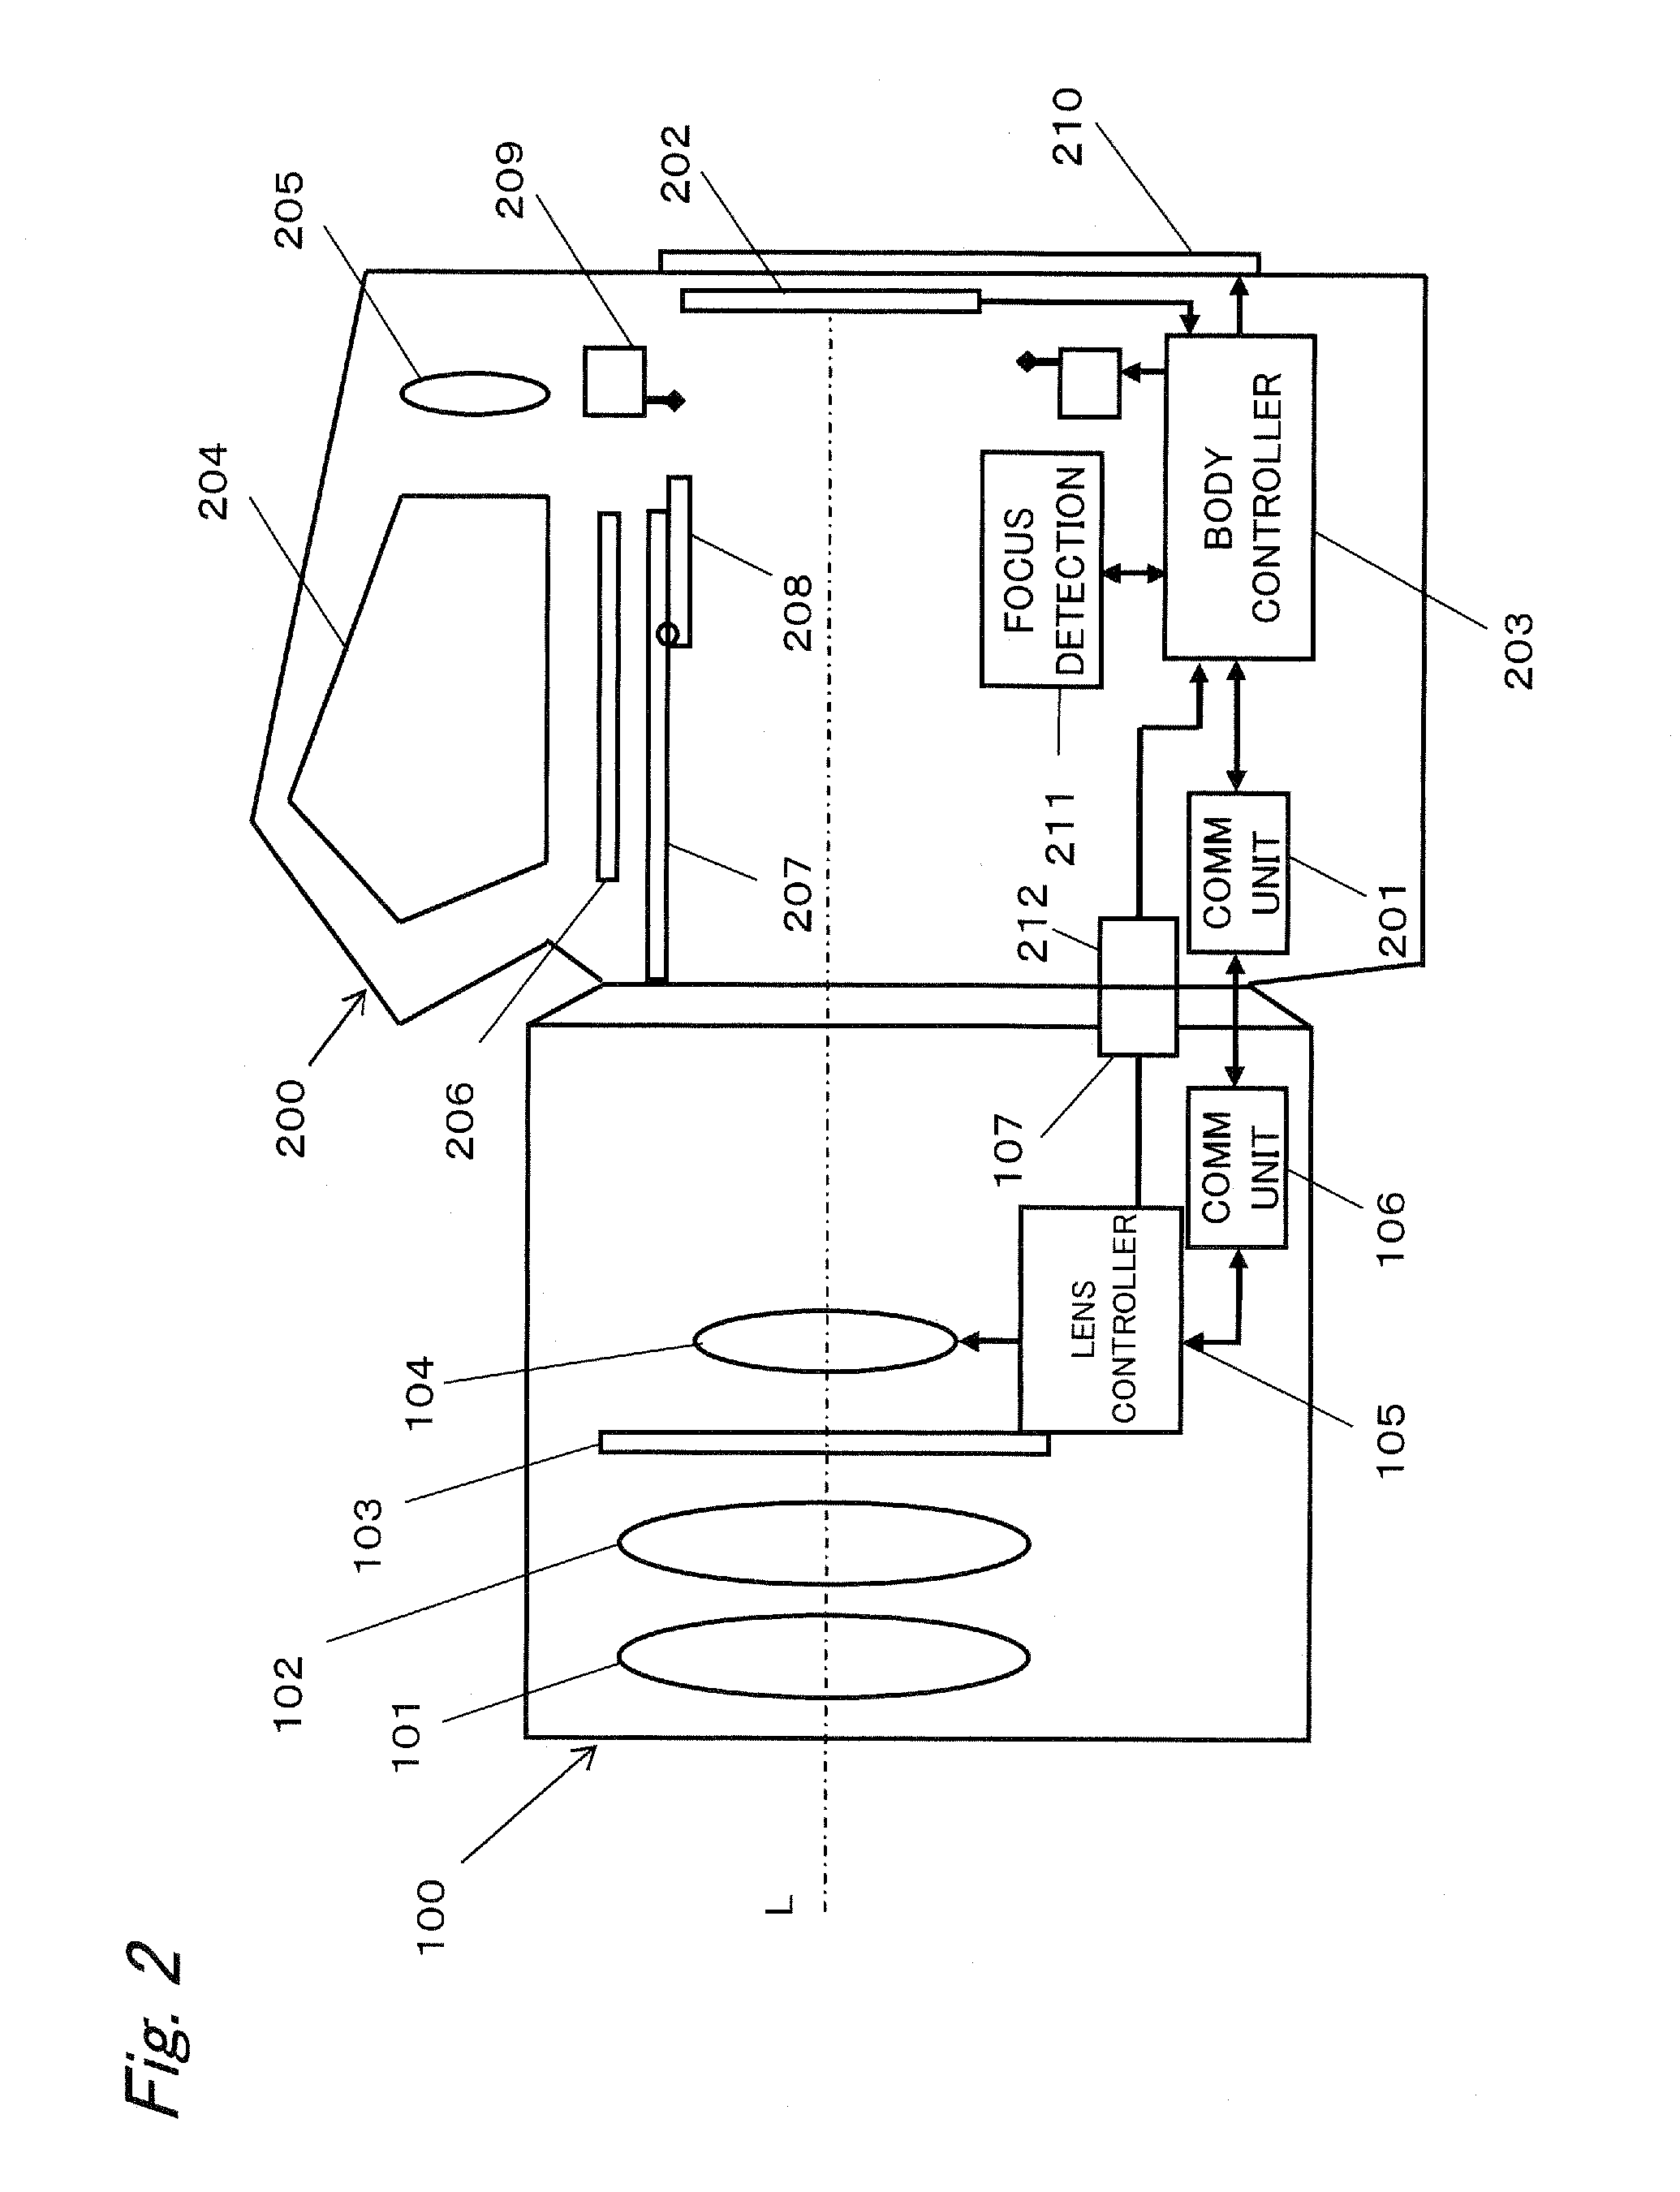 Imaging System and Camera Body